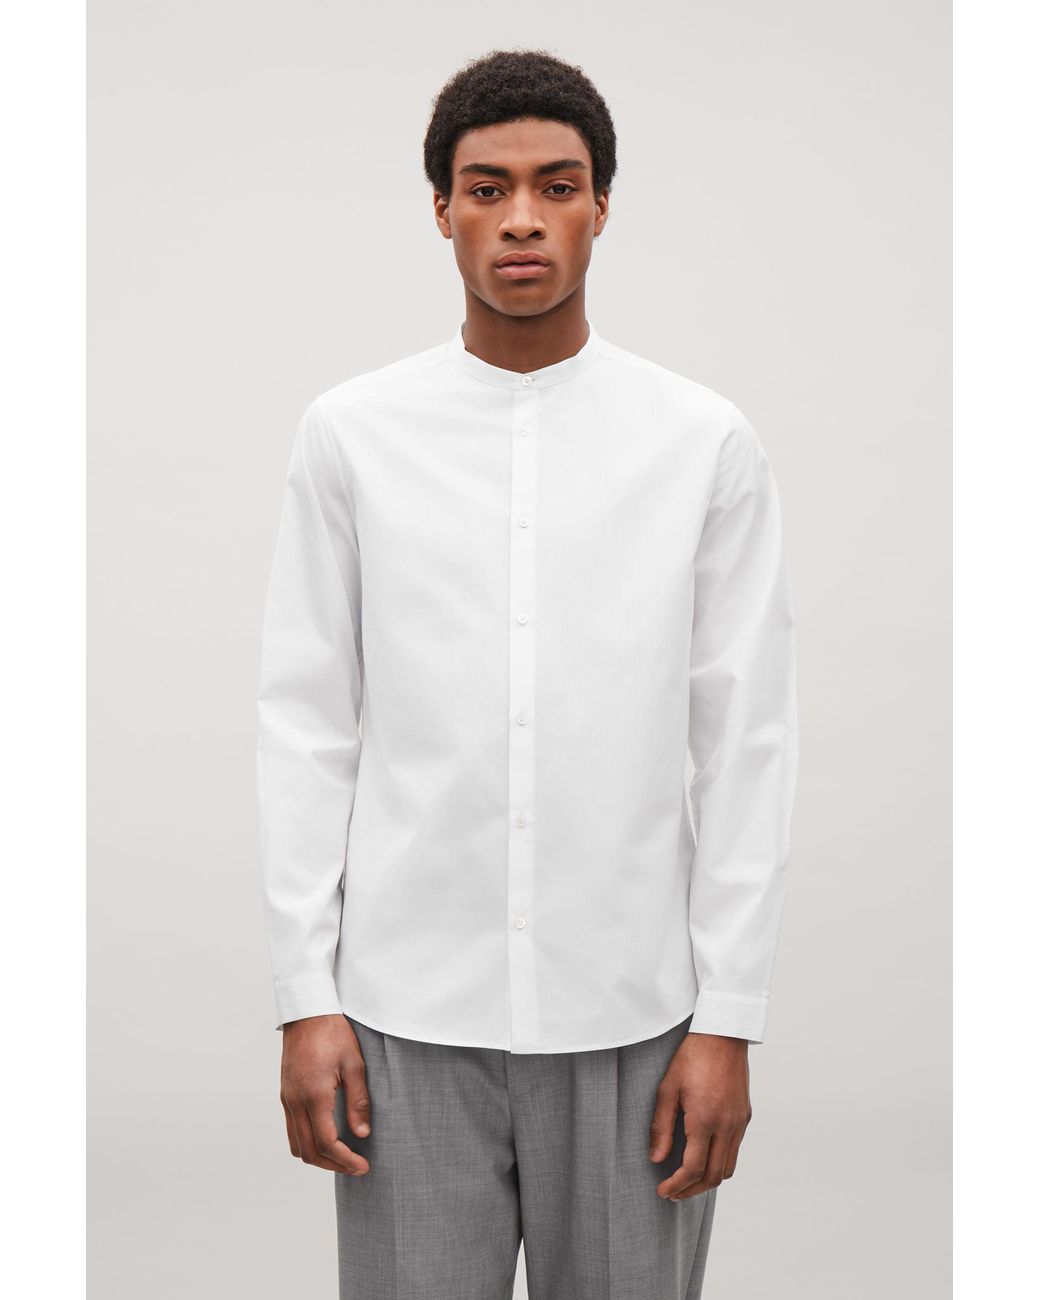 COS Collarless Cotton Shirt in White for Men | Lyst